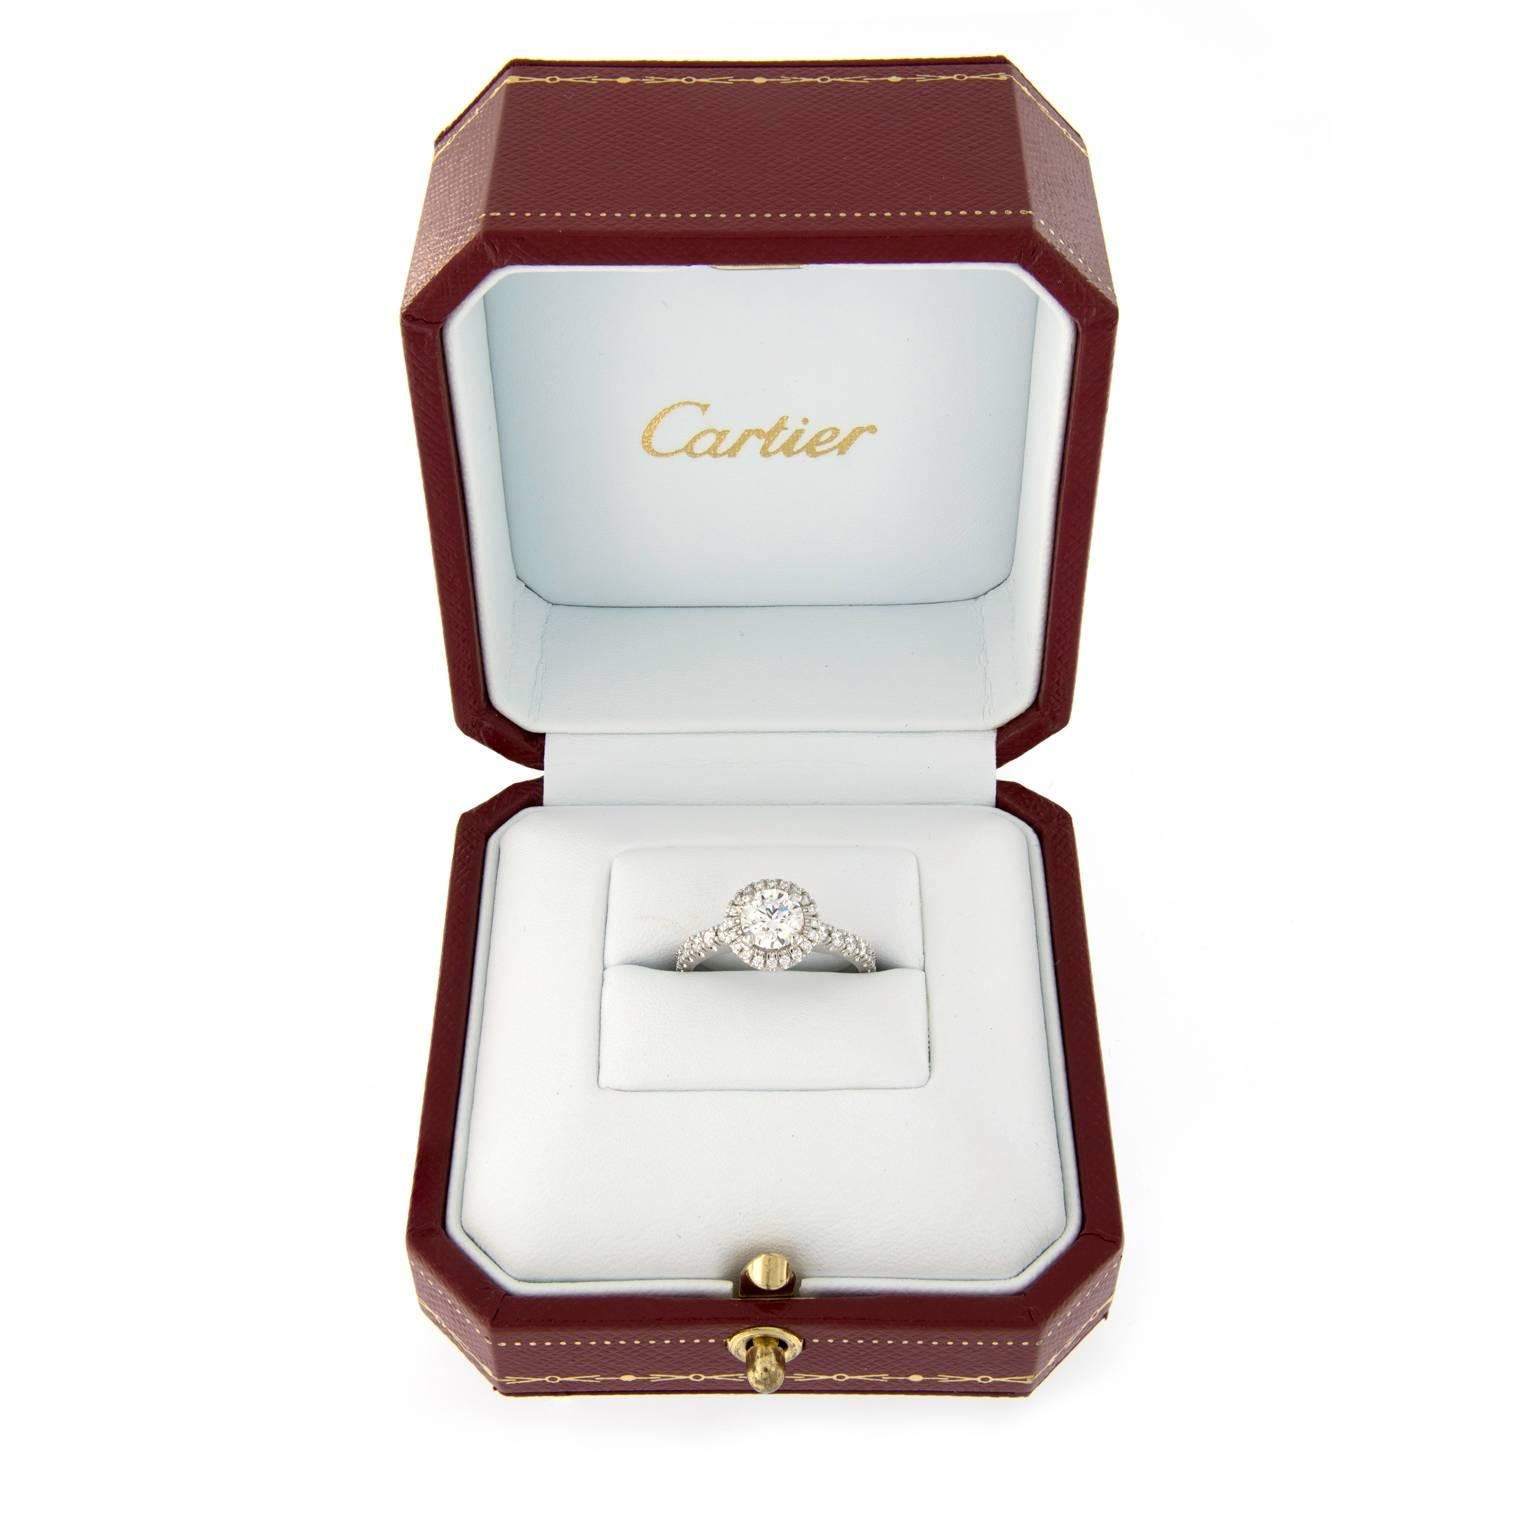 Classic Cartier Destinée solitaire ring in platinum, set with a brilliant-cut diamond. Ring includes Cartier box and certification of authentication. Weighs 4.8 grams. Ring Size 4.75. 9mm wide at the top, 2mm wide shank.
0.70 Carat RBC Diamond F,